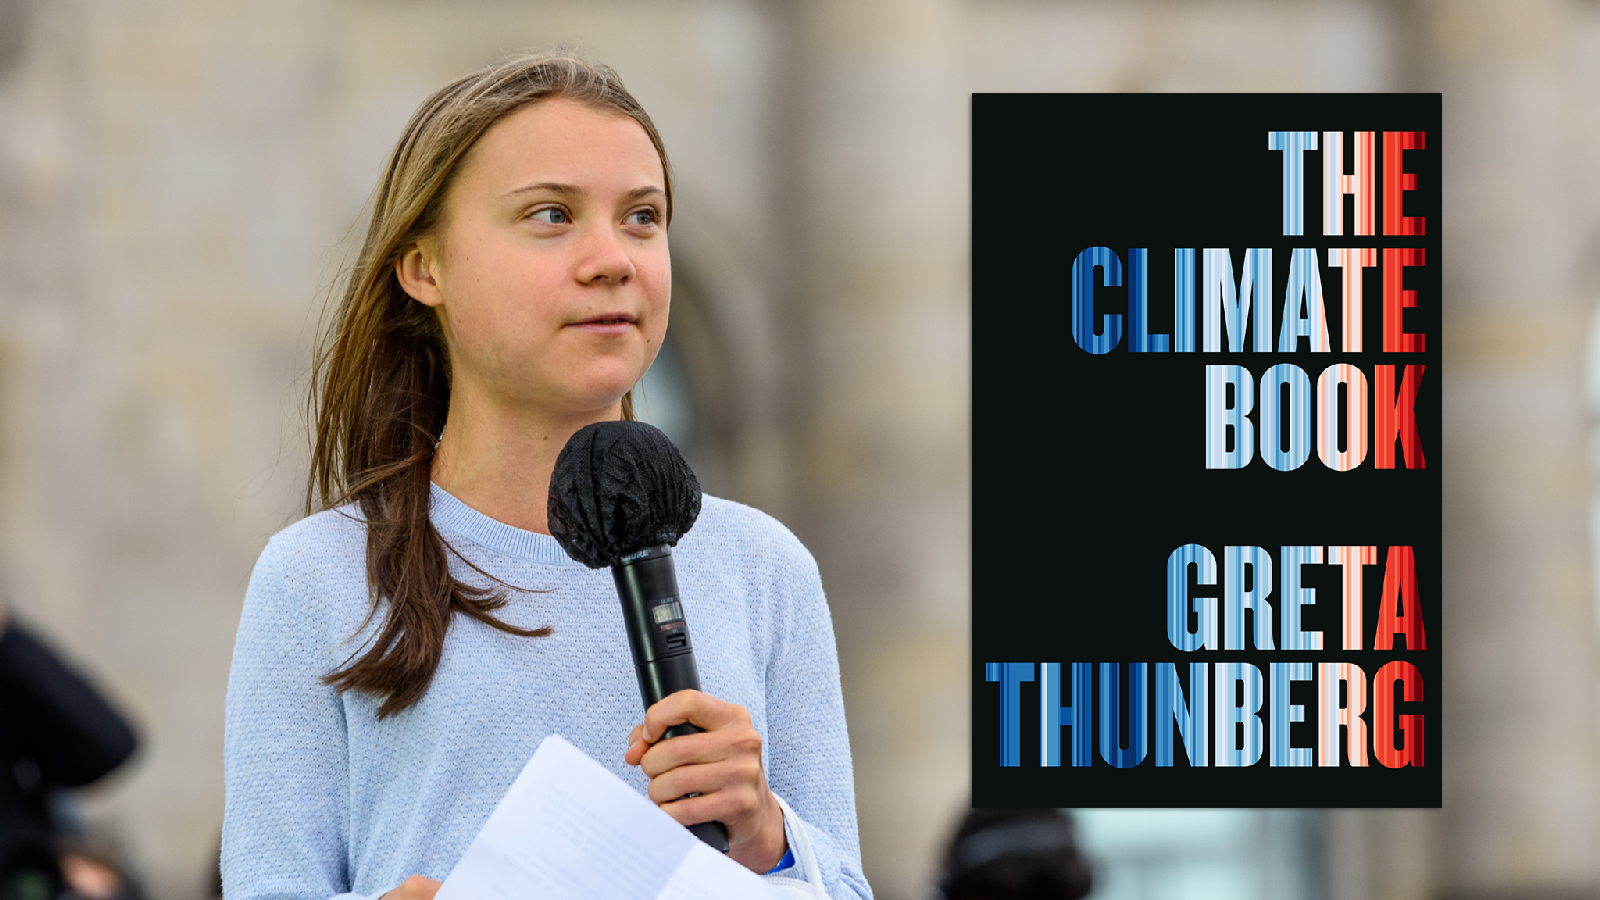 Book review: Greta Thunberg tells it like it is in “The Climate Book” » Yale Climate Connections